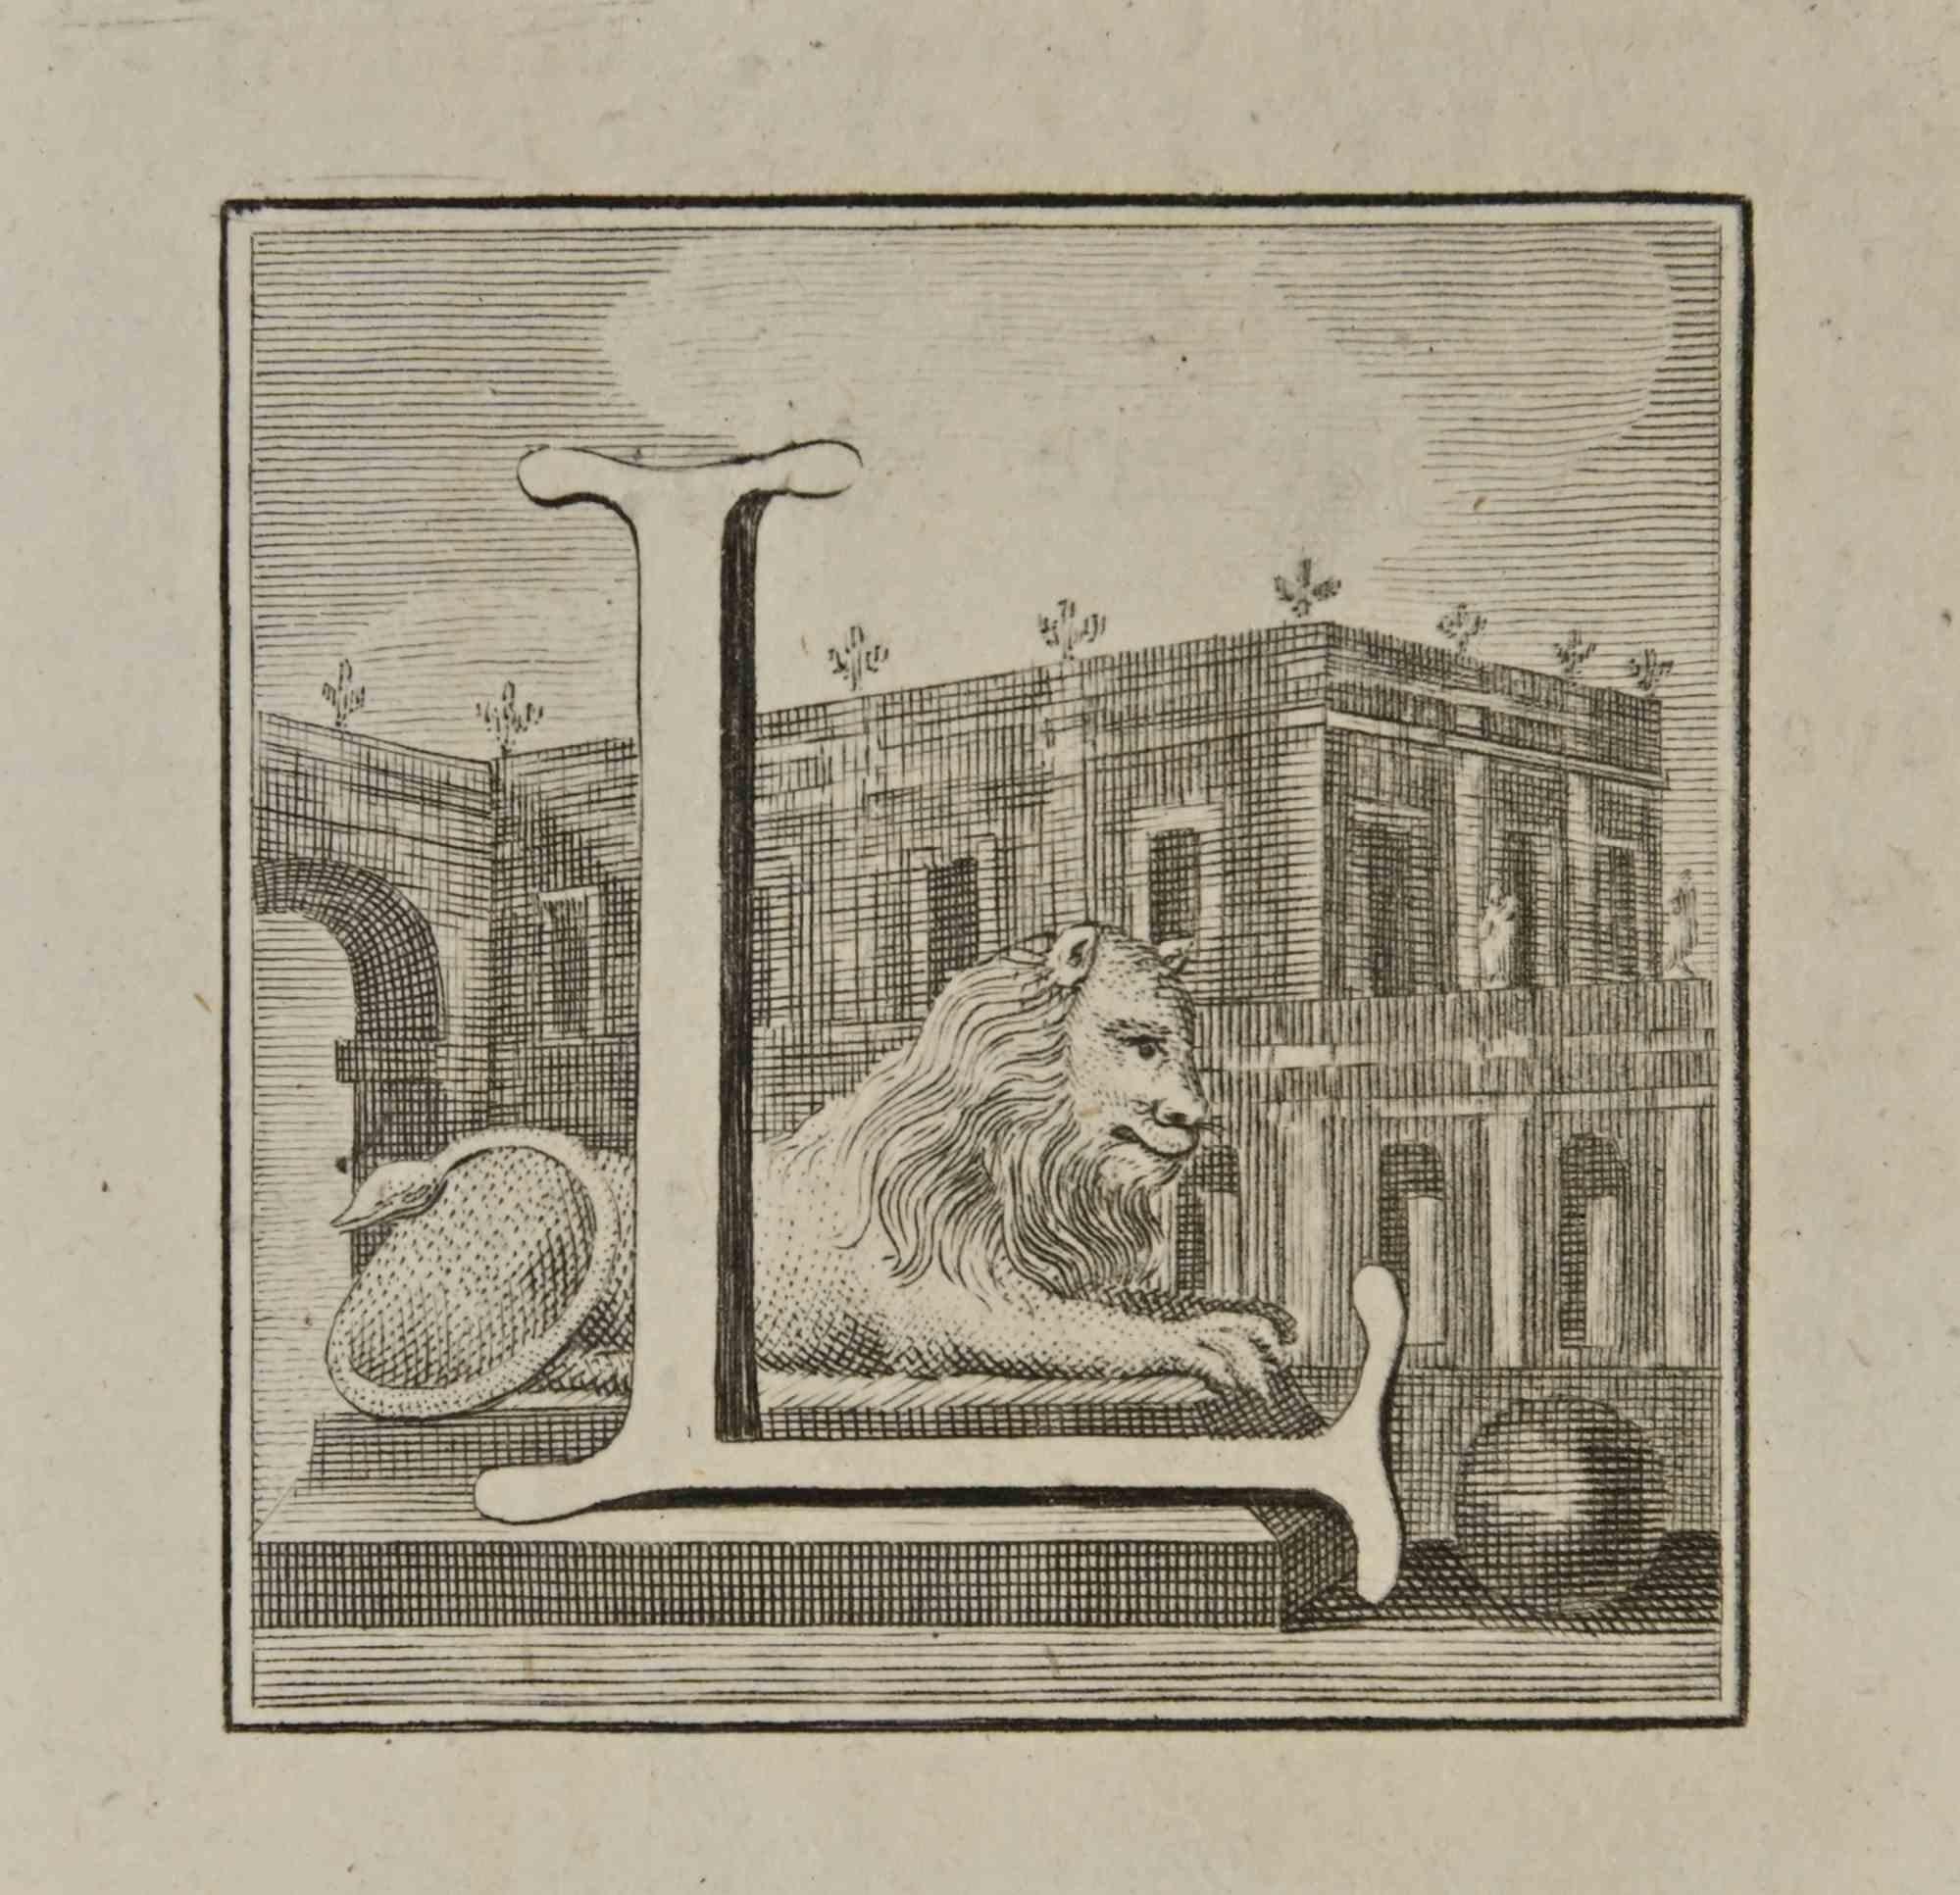 Letter of the Alphabet L,  from the series "Antiquities of Herculaneum", is an etching on paper realized by Luigi Vanvitelli in the 18th century.

Good conditions.

The etching belongs to the print suite “Antiquities of Herculaneum Exposed”